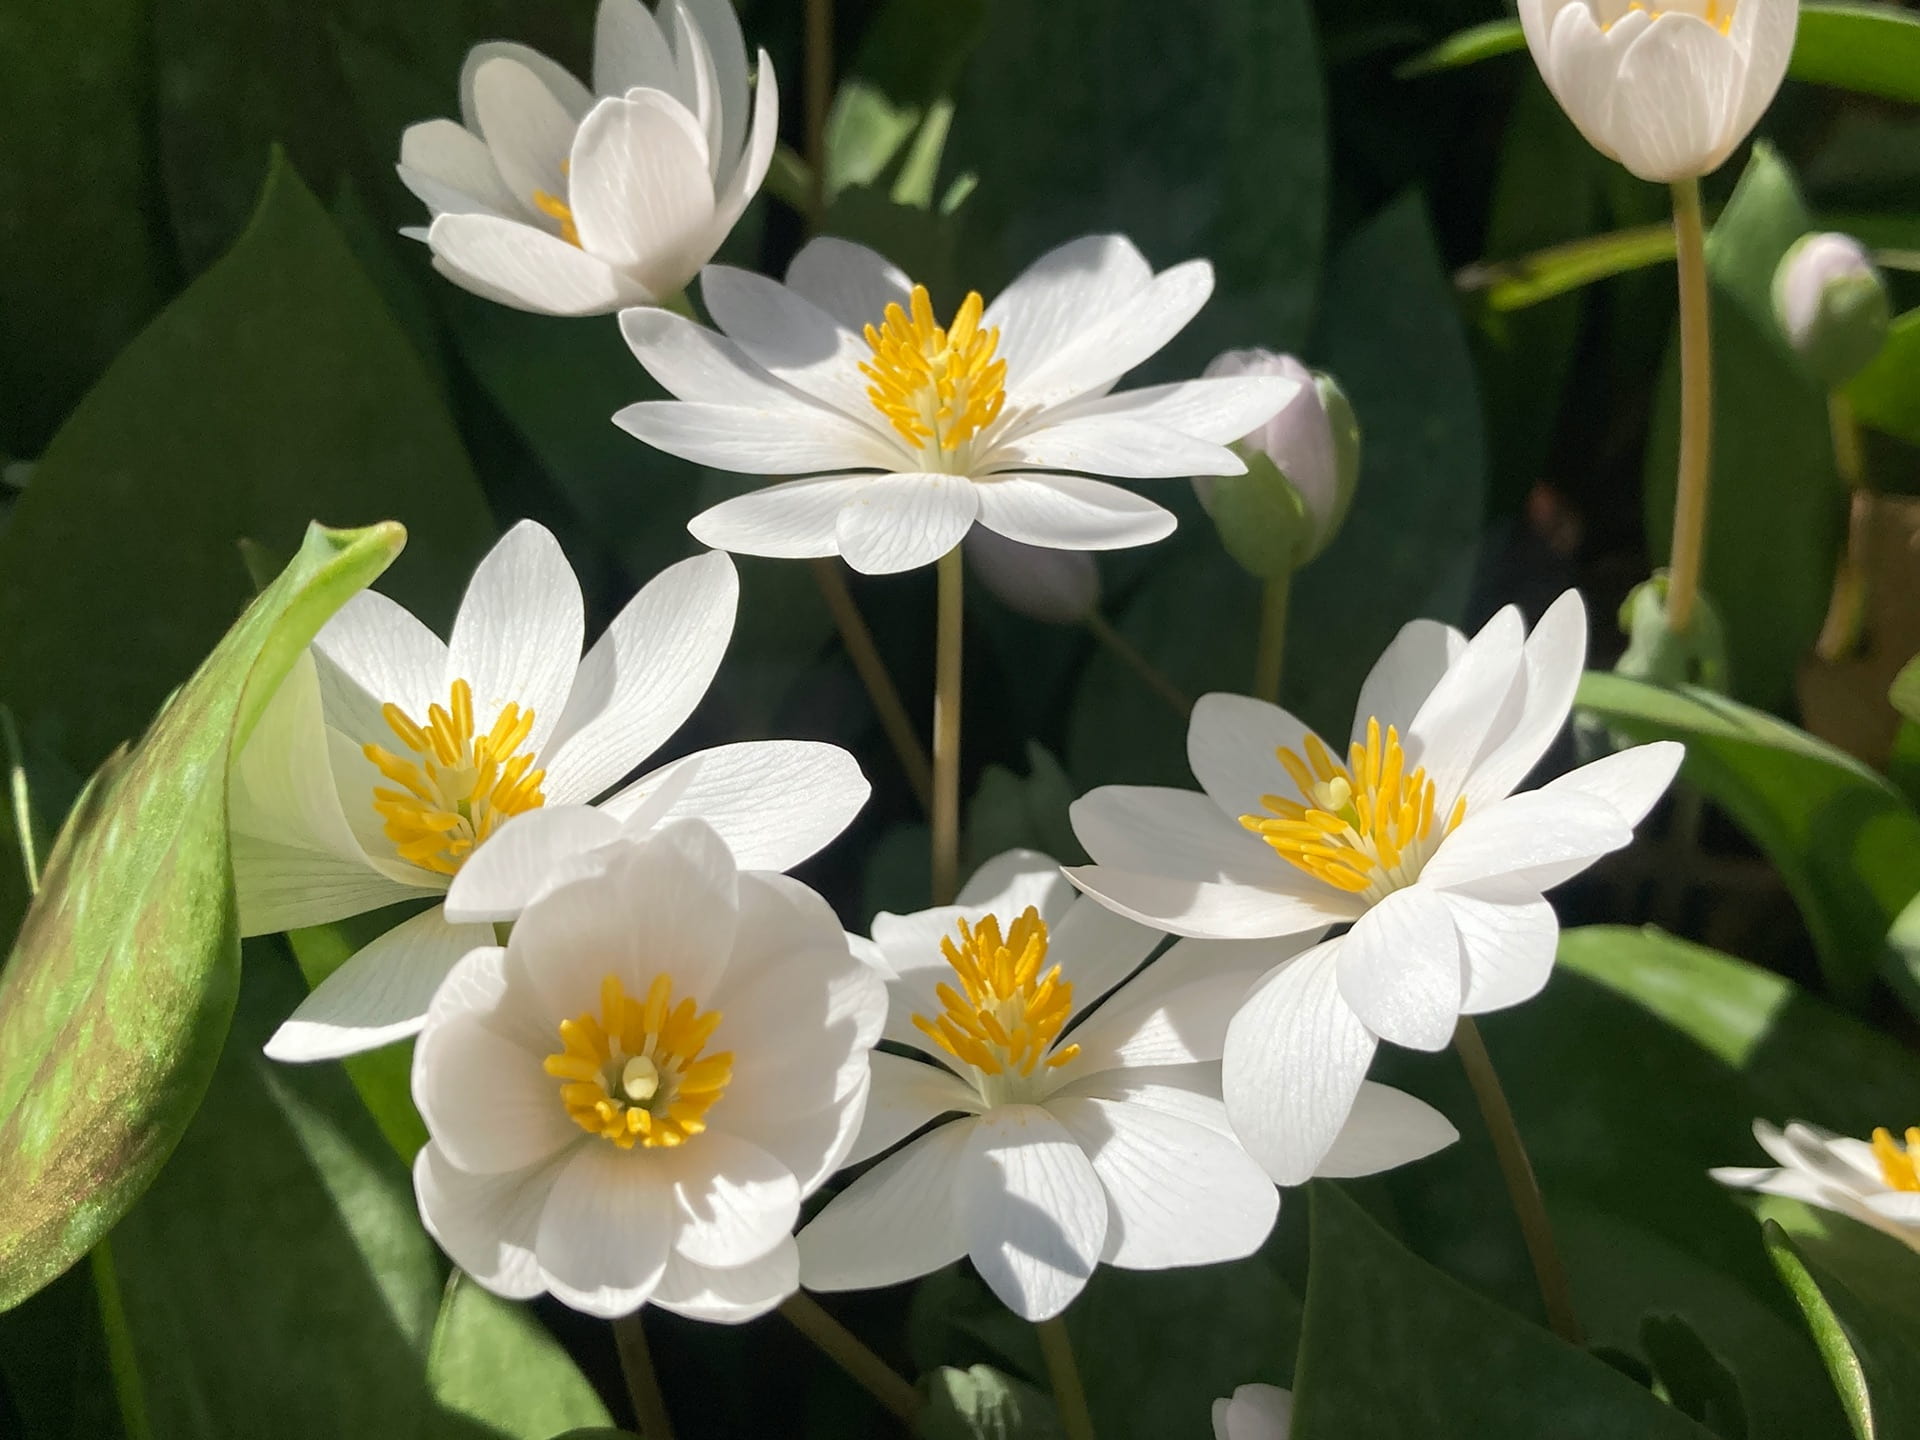 Bloodroot, Sanguinaria canadensis, grows through the park's patch of trout lilies.